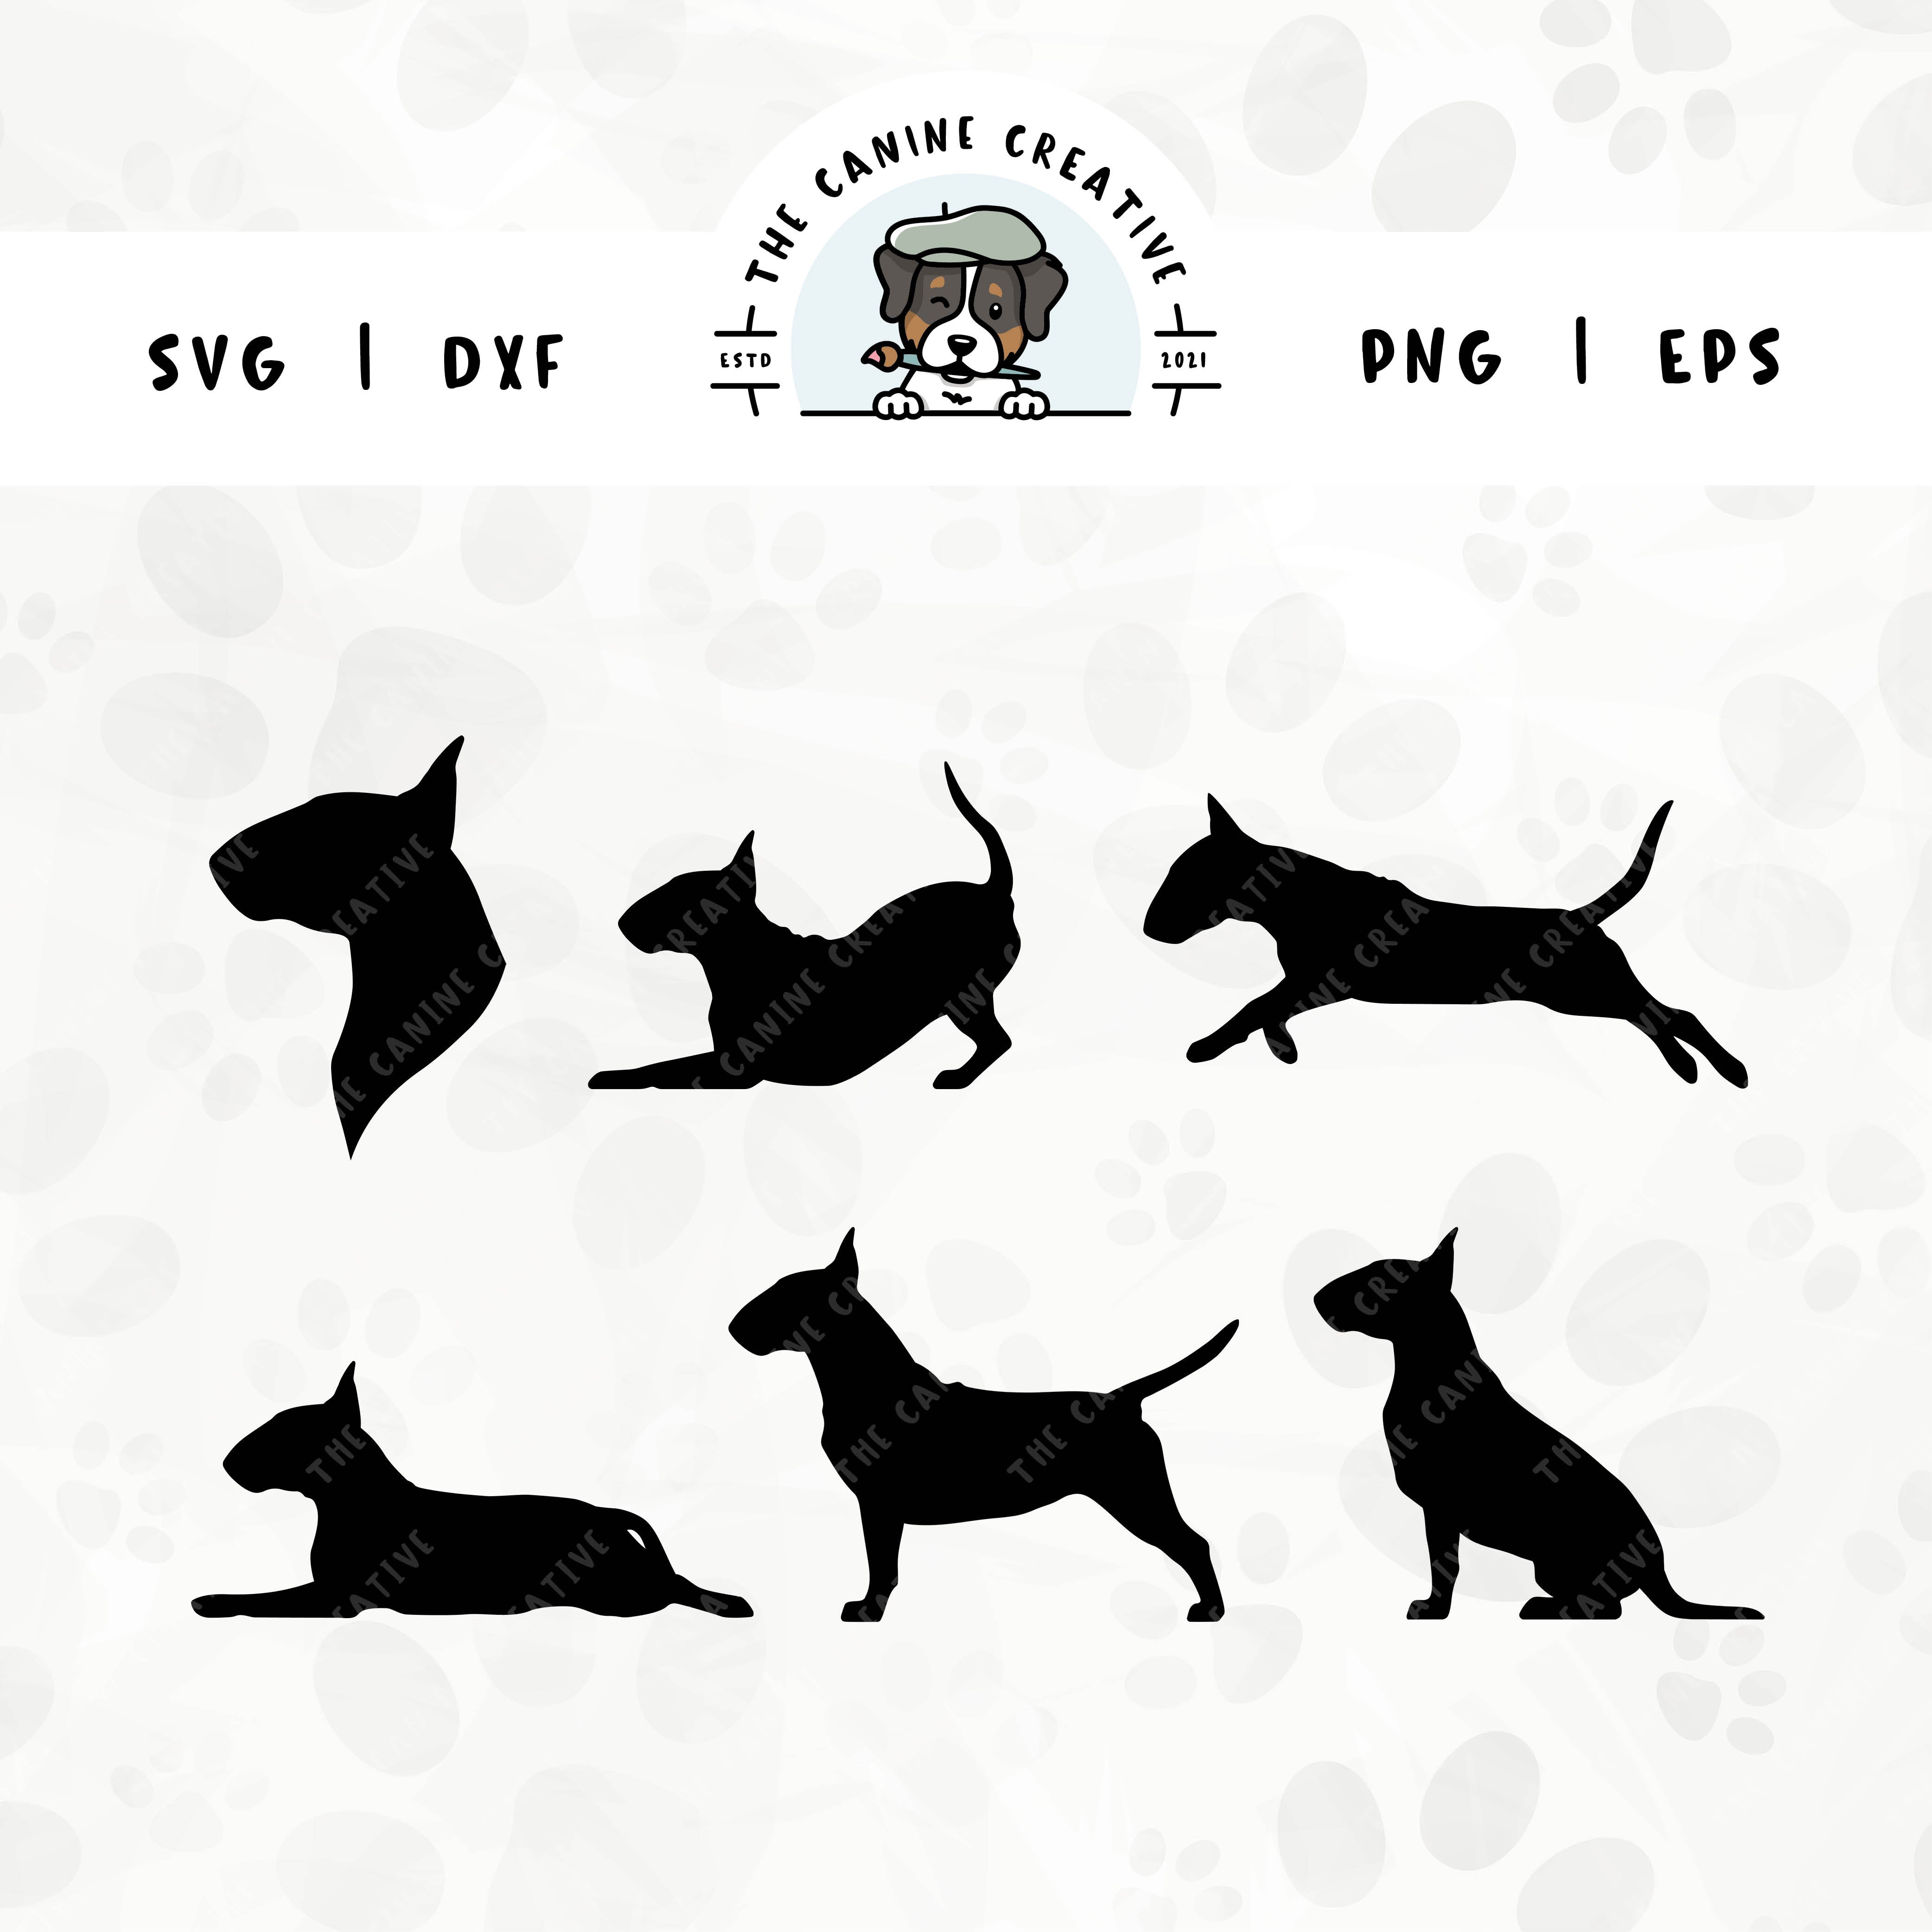 This 6-pack Bull Terrier silhouette bundle (set 1) features a dog's head in profile, along with various poses including running, laying down, playing, standing, and sitting. File formats include: SVG, DXF, PNG, and EPS.